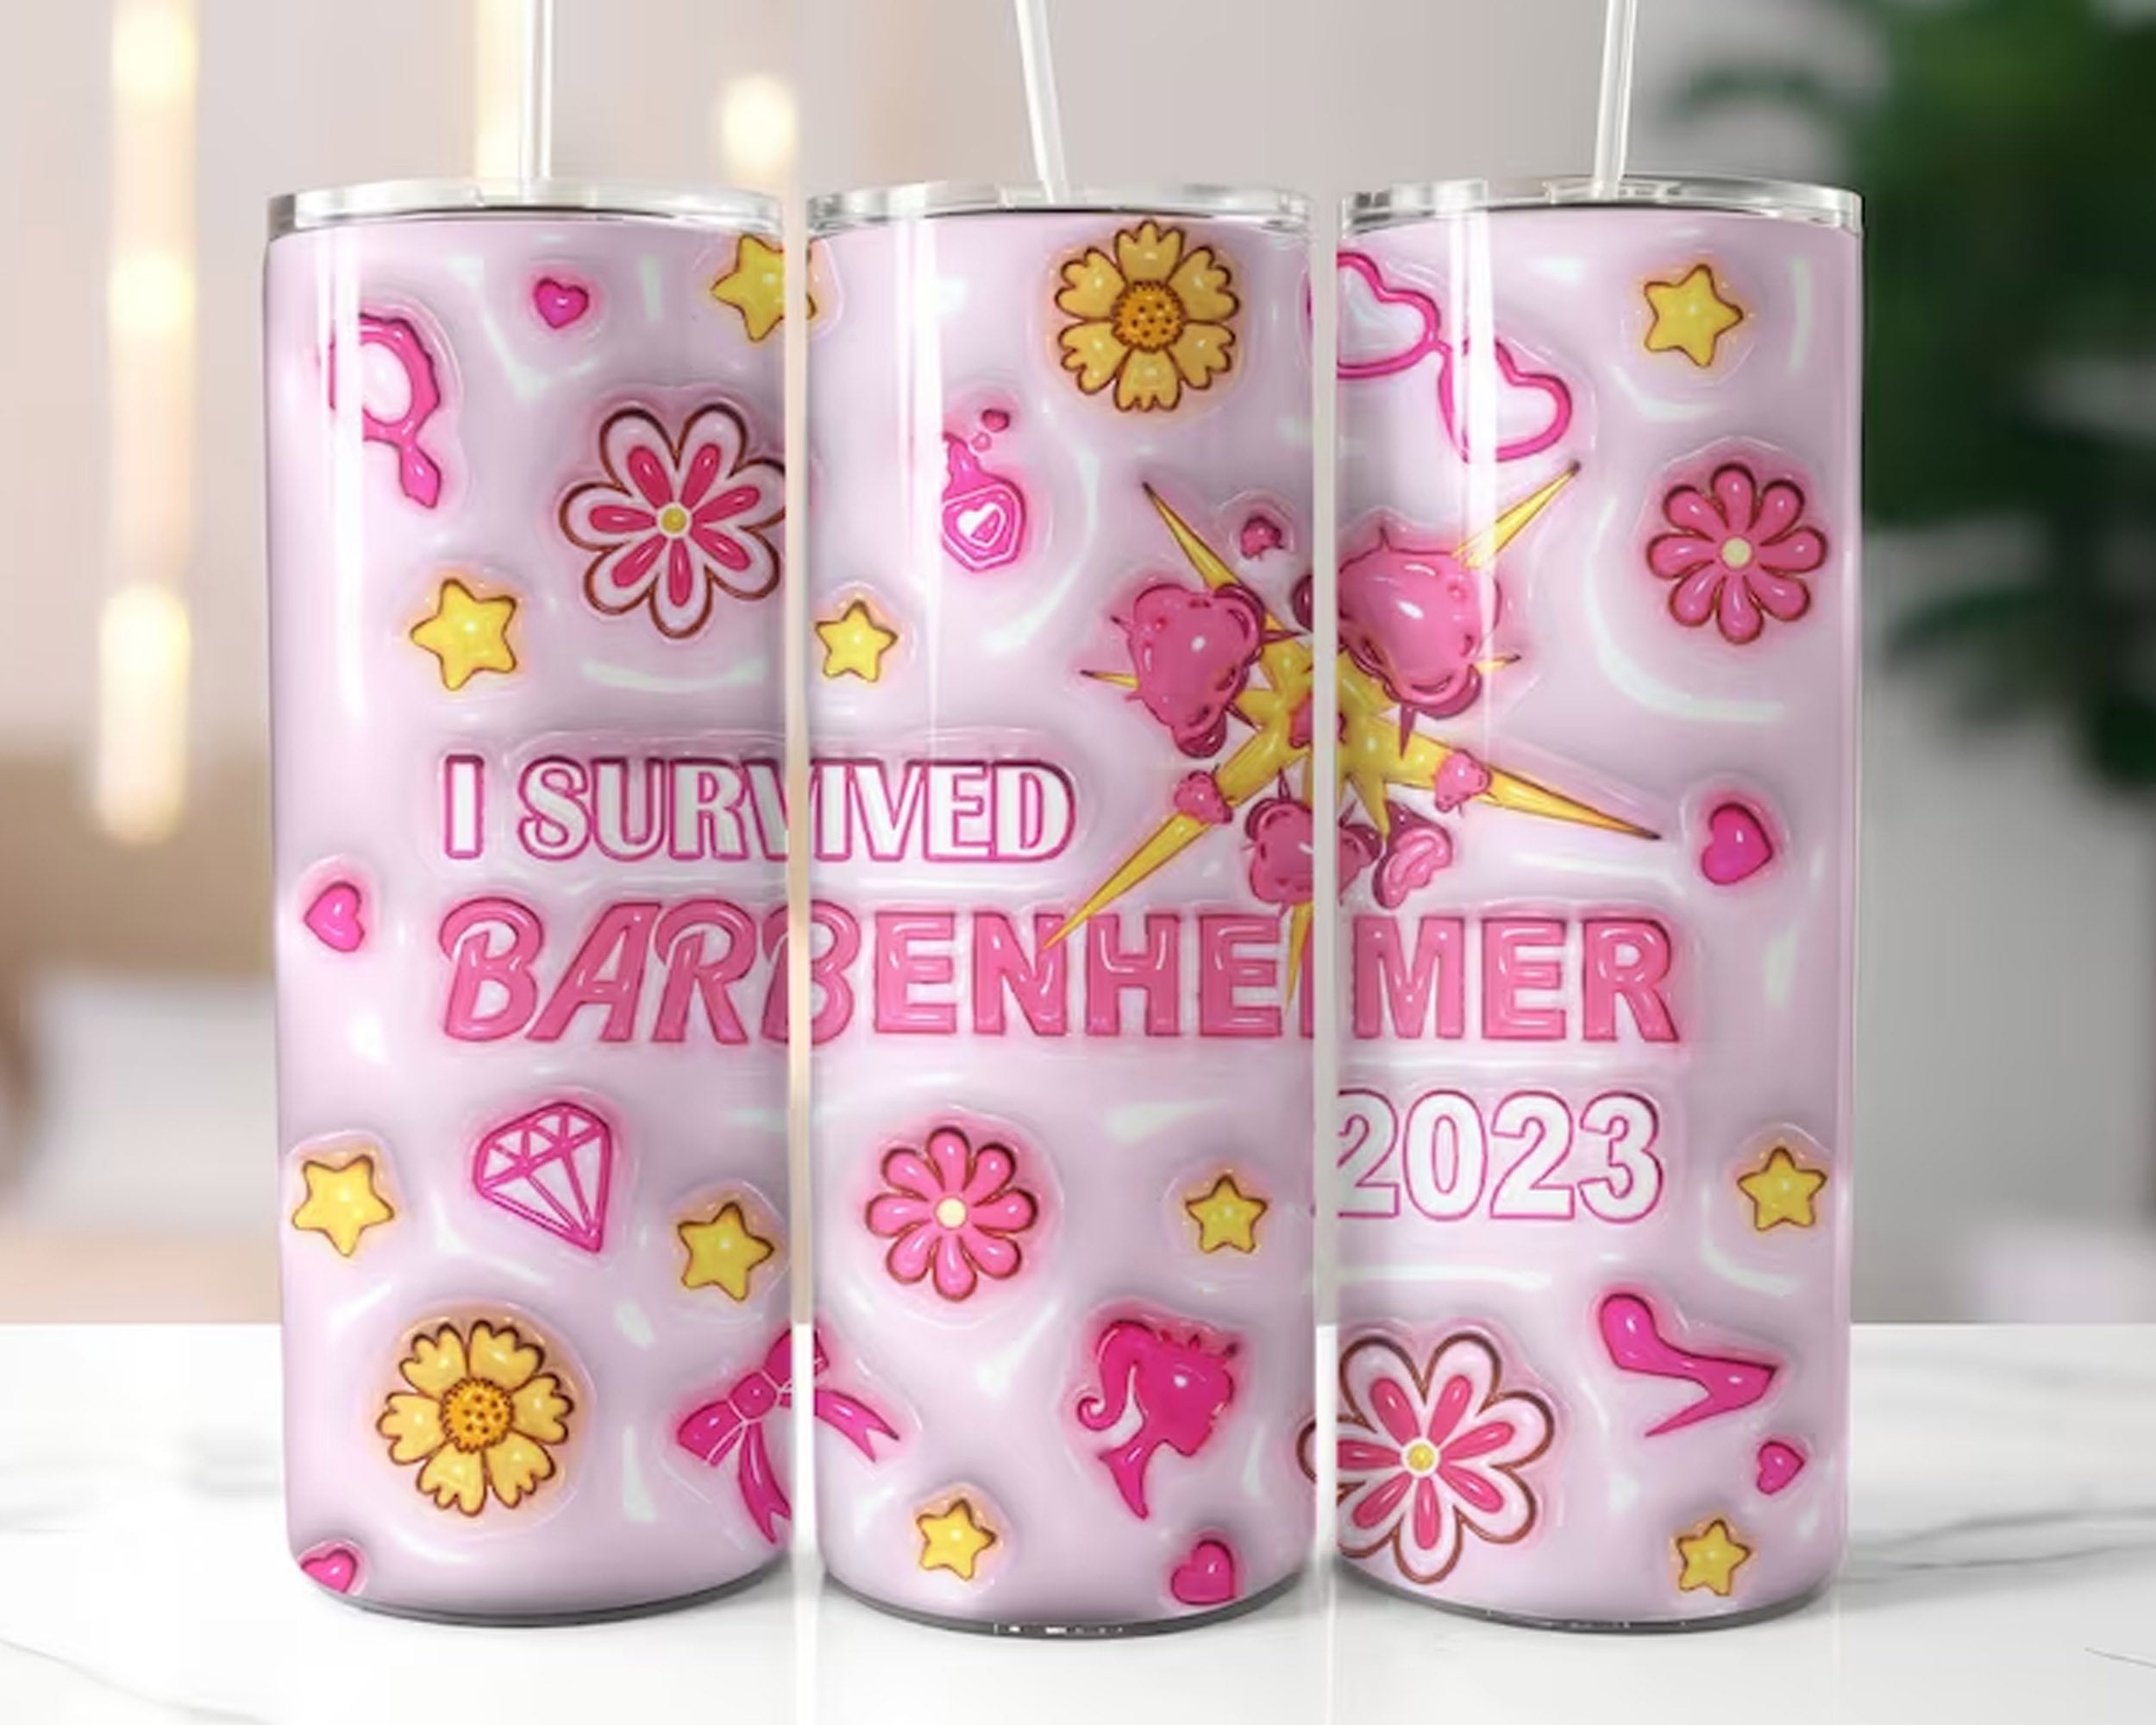 Let's Go Party Tumbler with Straw Personalize Name Hot Pink Barb